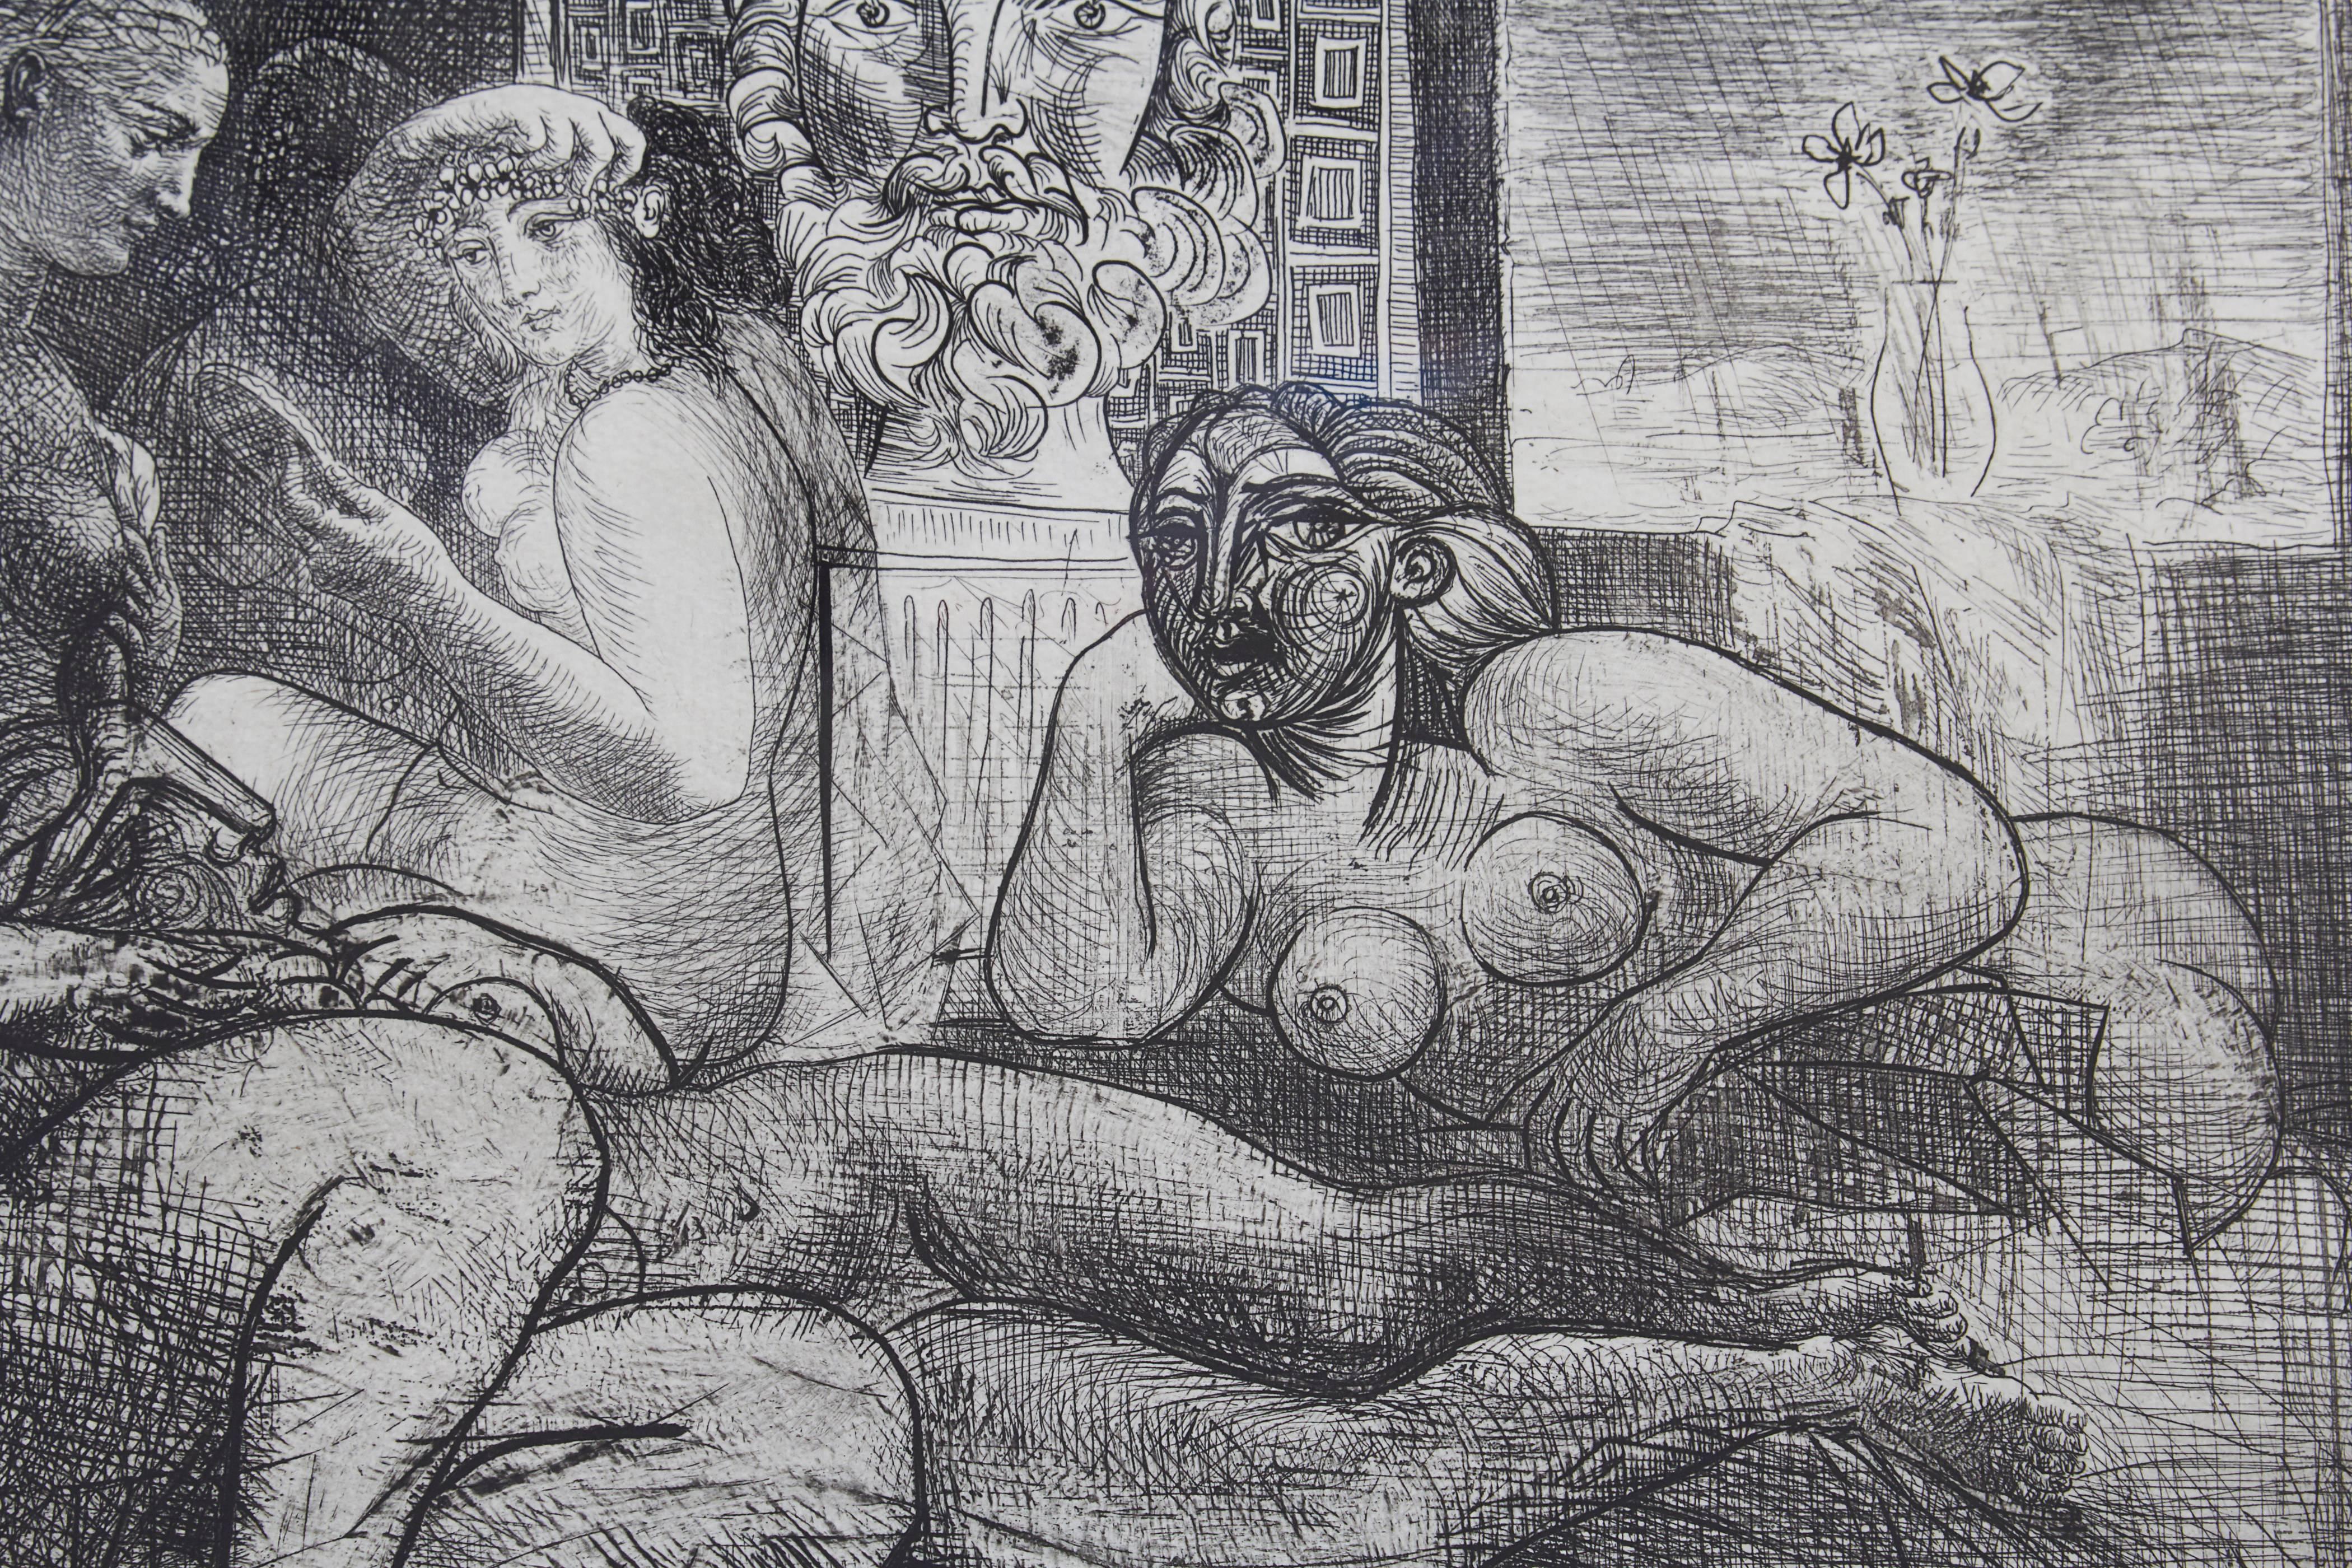 Pablo Picasso (1881-1973)
Quatre Femmes Nues et Tete Sculptee 
(Bloch 219)
1934
Etching and drypoint on laid paper with the Vollard watermark
Image size: 8 5/8 x 12 1/4 inches 
Framed size: 21 1/2 x 24 3/4 inches 
Edition of 250
Signed in